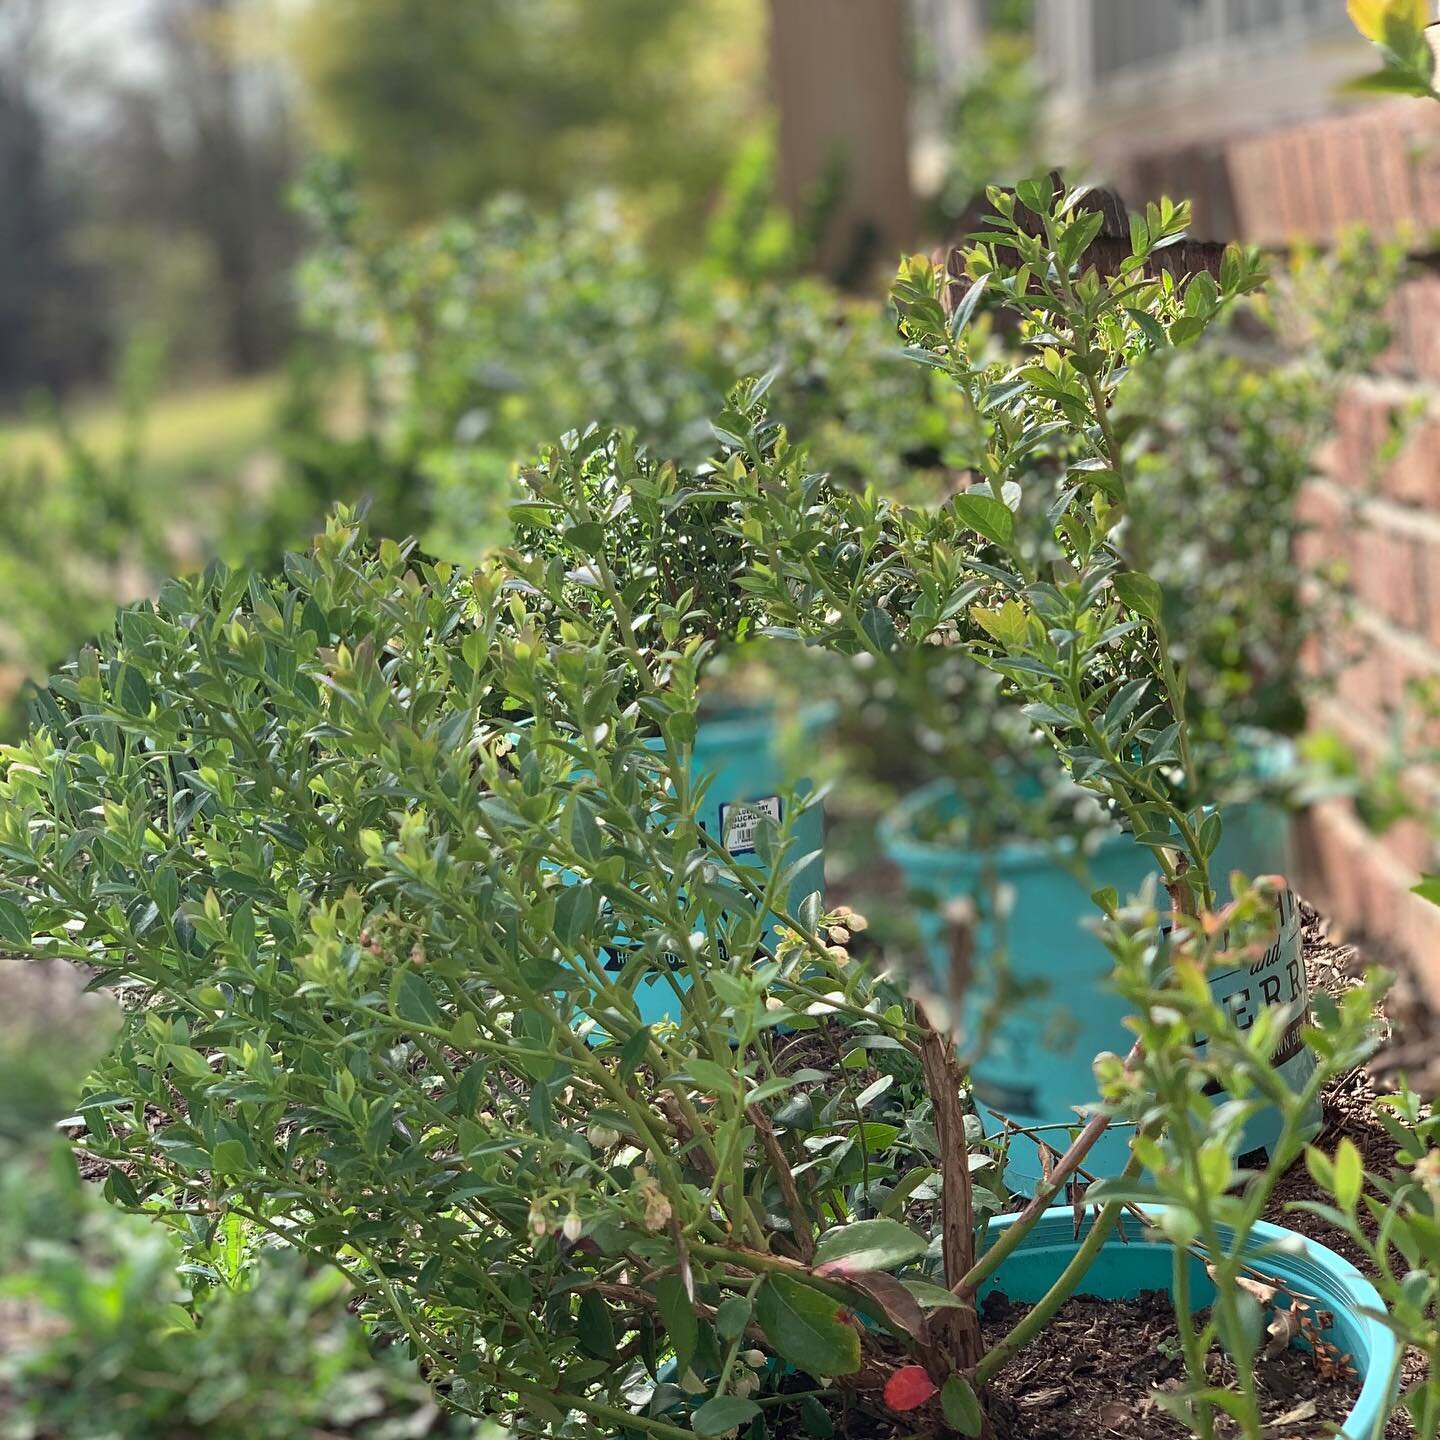 I&rsquo;m getting a do-over! and I&rsquo;m so excited for it! 

When we built our house we hastily picked out our landscaping shrubs for the front of the house without much thought. They were way too big for the space, overtook everything, and - most